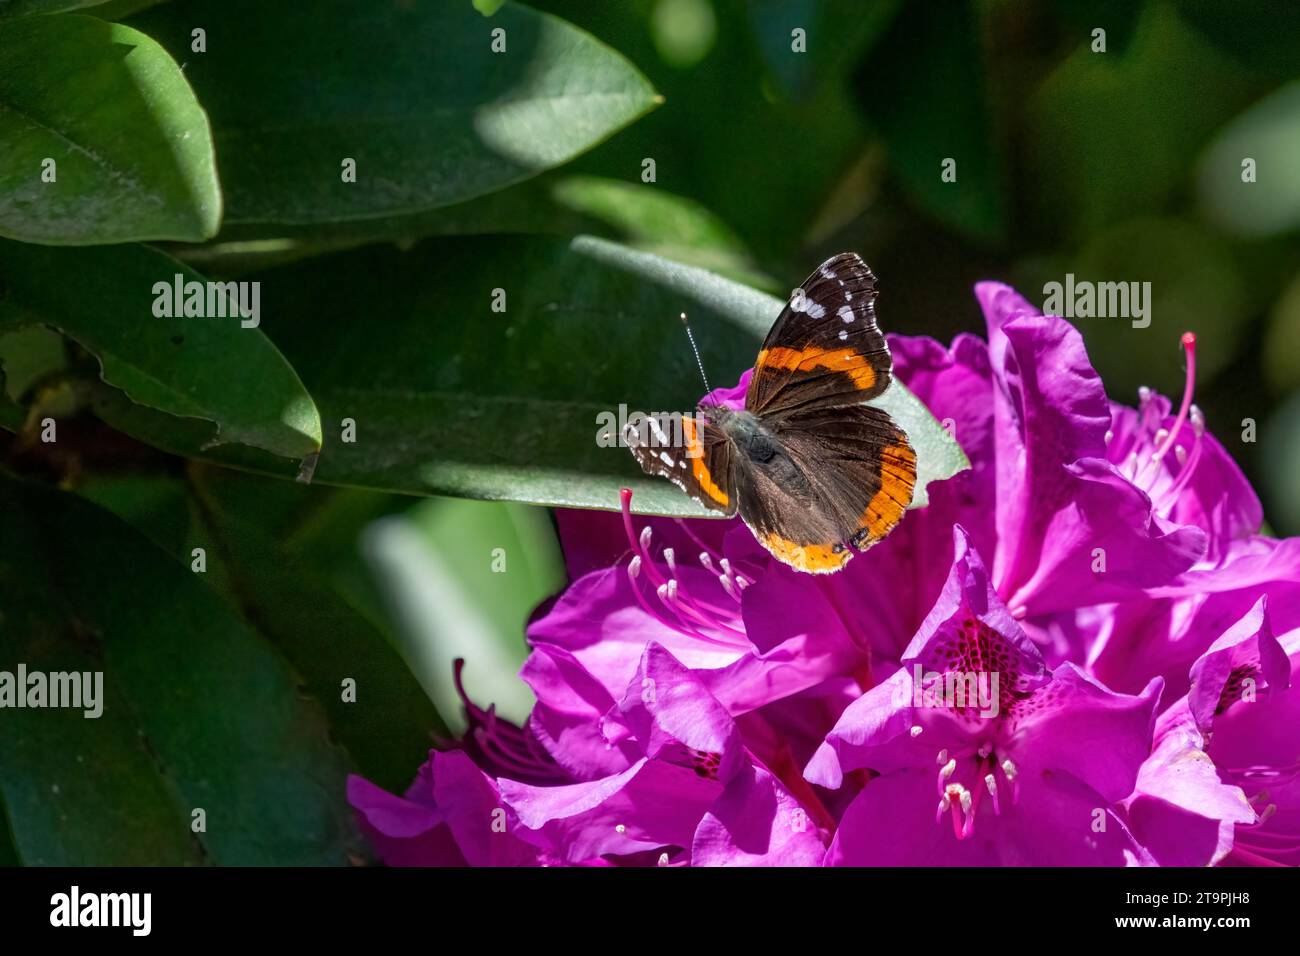 Issaquah, Washington, USA.   Red Admiral butterfly on a Pacific Rhododendron in bloom. Stock Photo